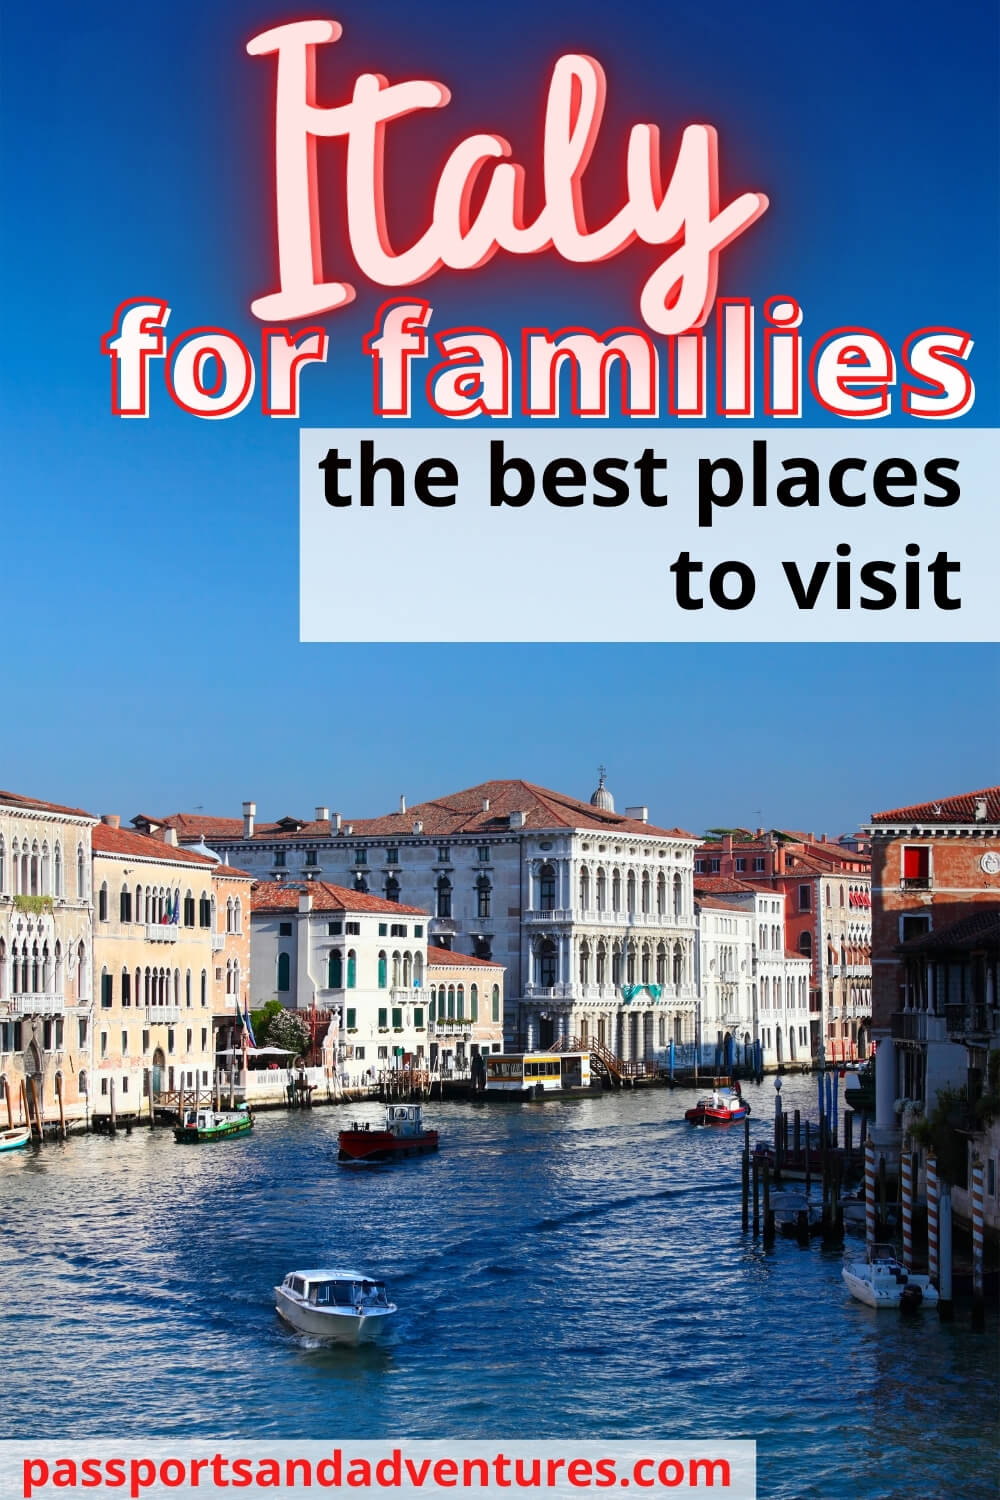 Best Places to Visit in Italy for Families